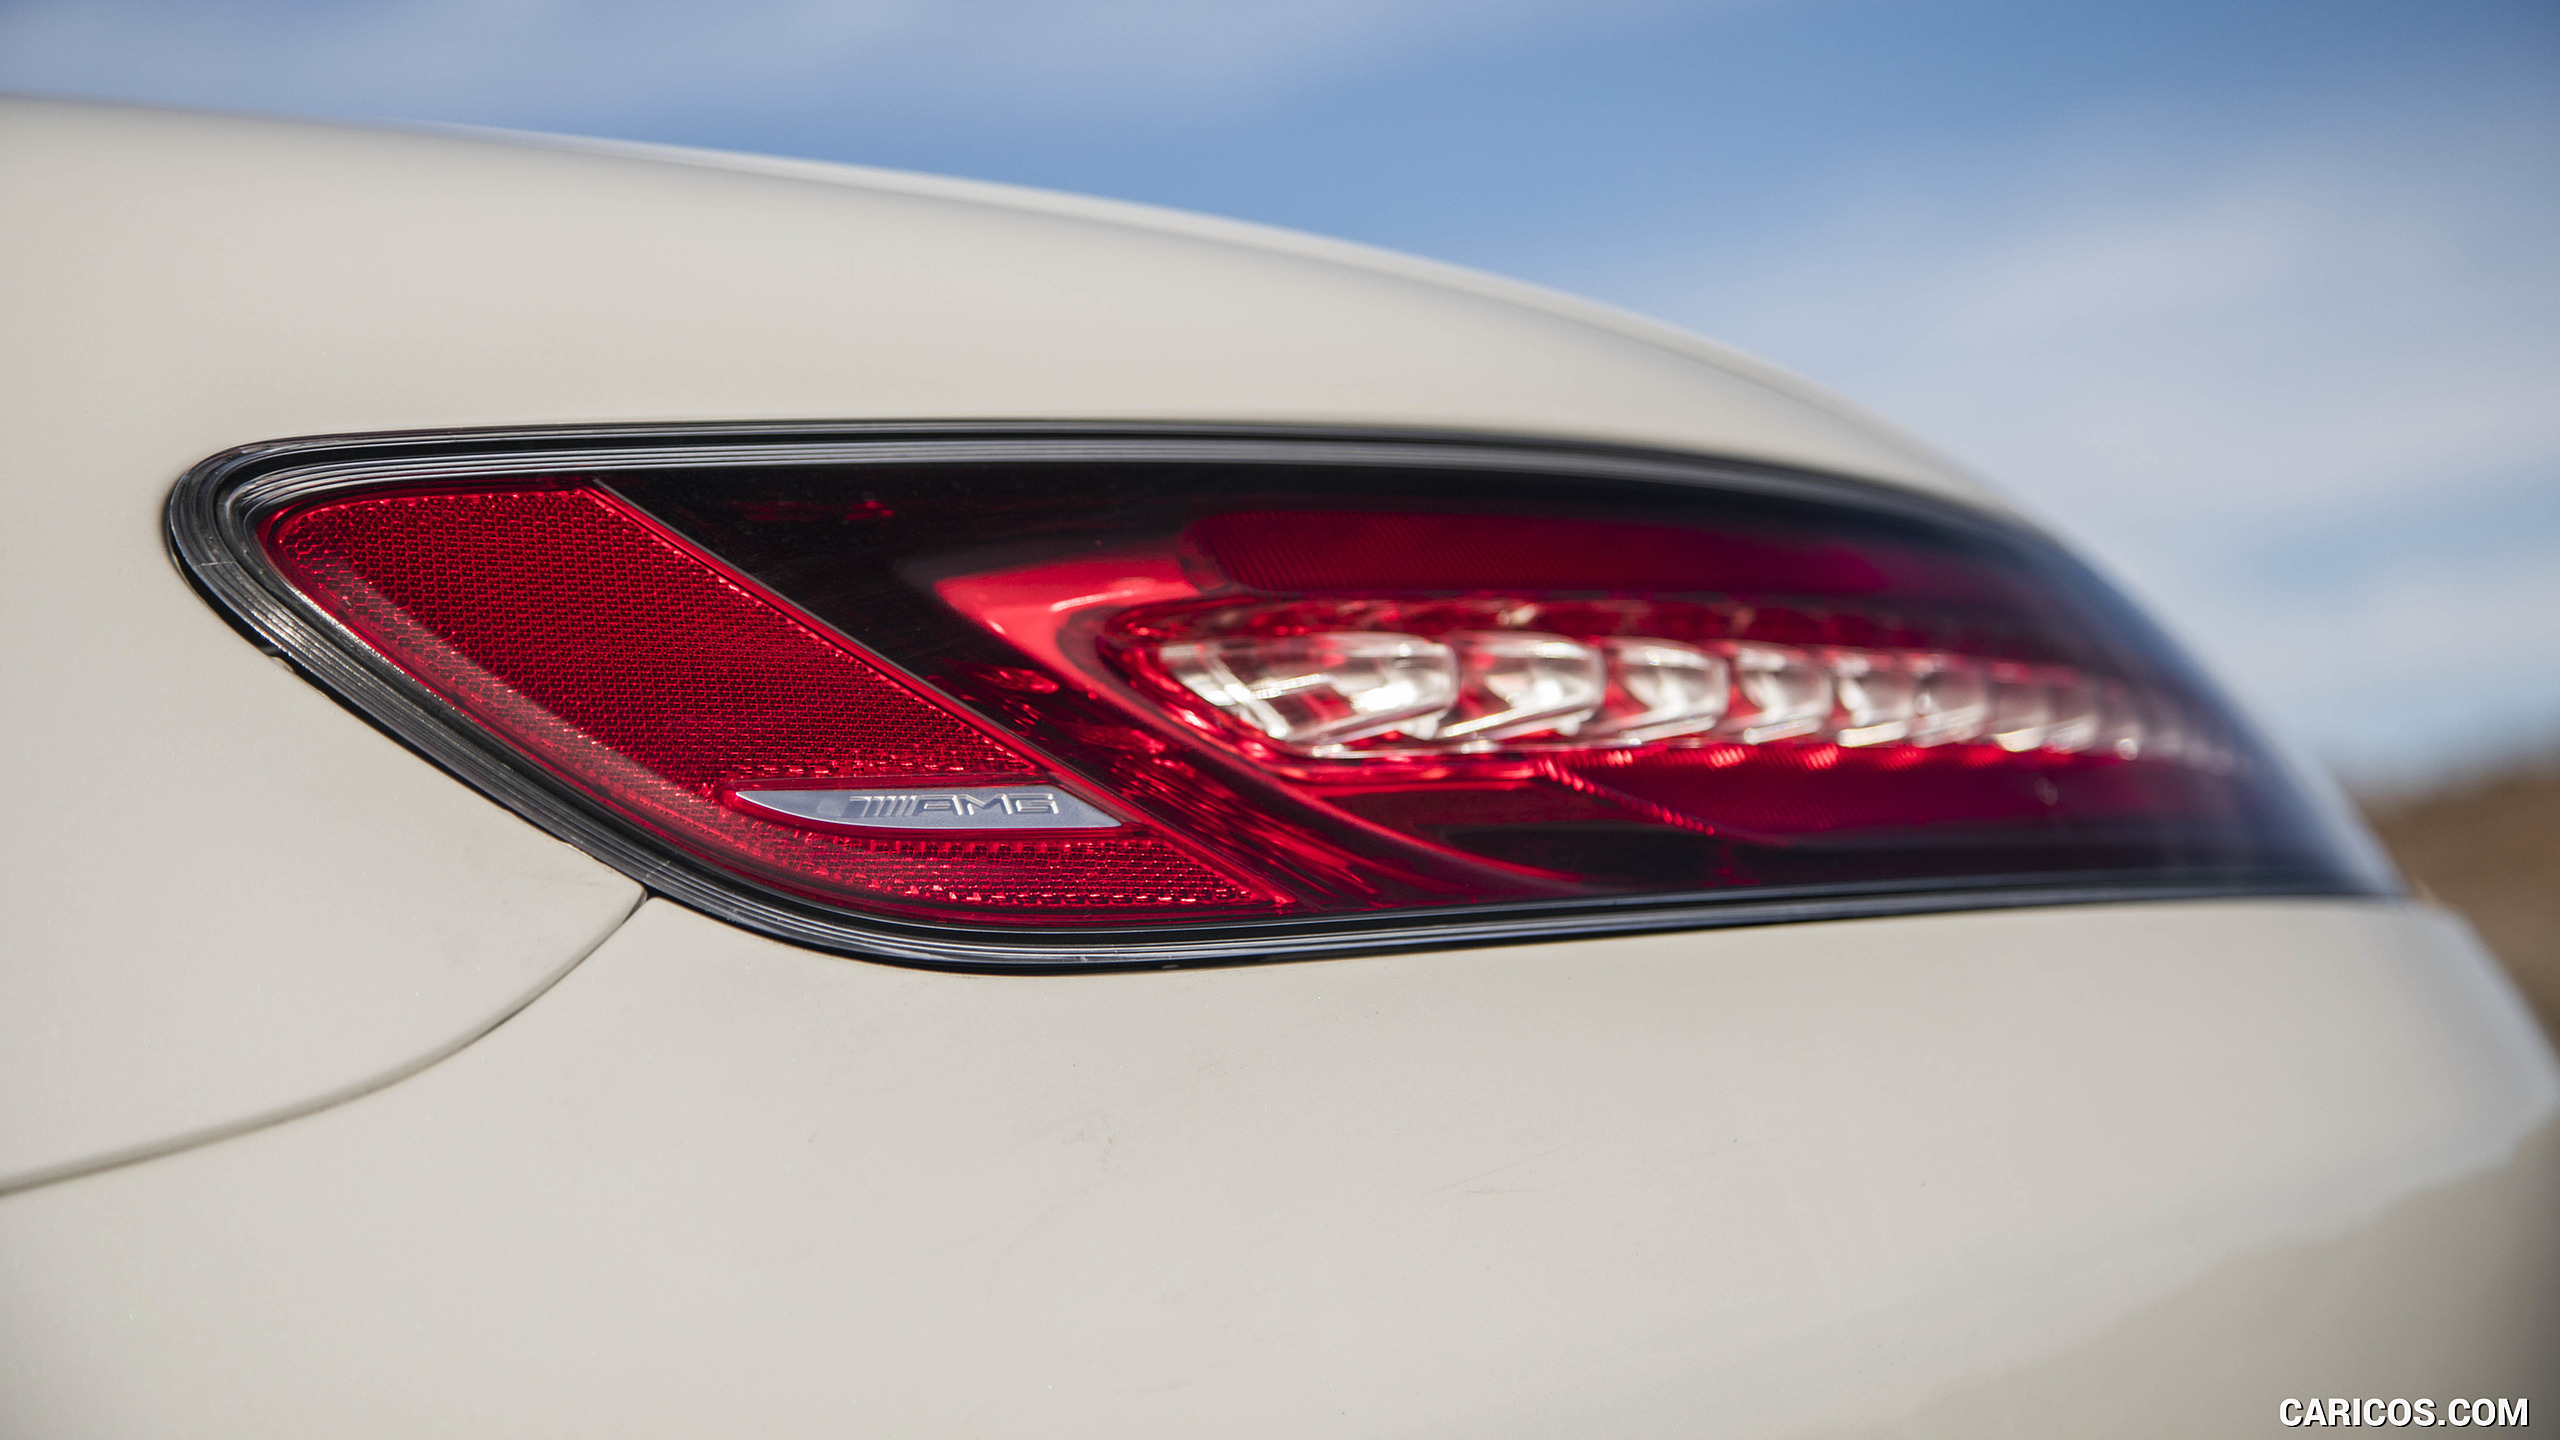 2018 Mercedes-AMG GT Roadster - Tail Light, #103 of 350